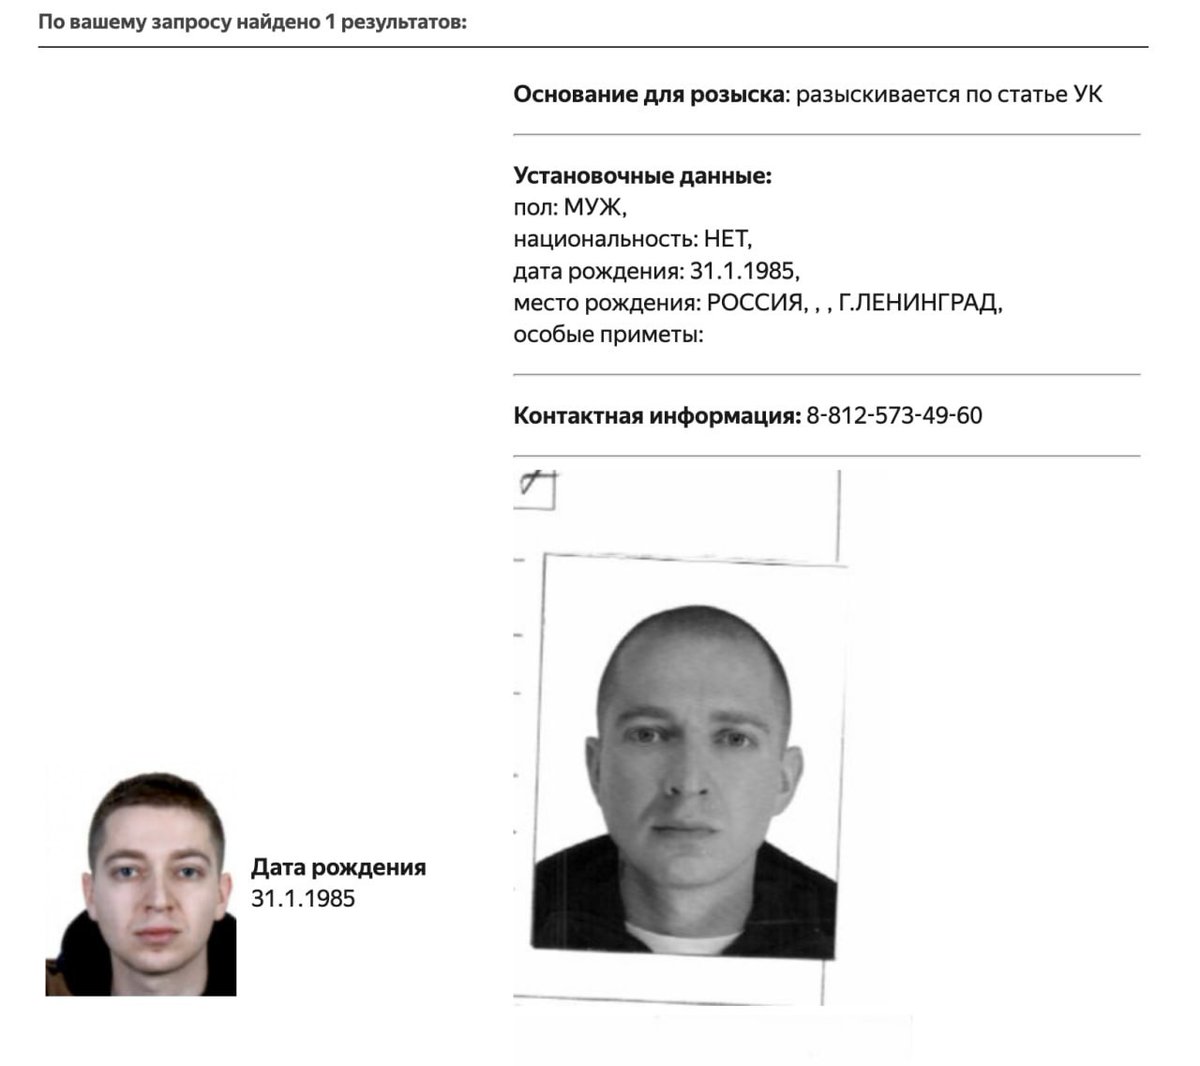 Rapper @norimyxxxo is put on the wanted list in Russia, with a pending criminal case (charges unknown). Oxxxymiron (Miron Fedorov) left the country after the start of the full-scale invasion in Ukraine, actively protested against it, was declared a 'foreign agent' in October 2022